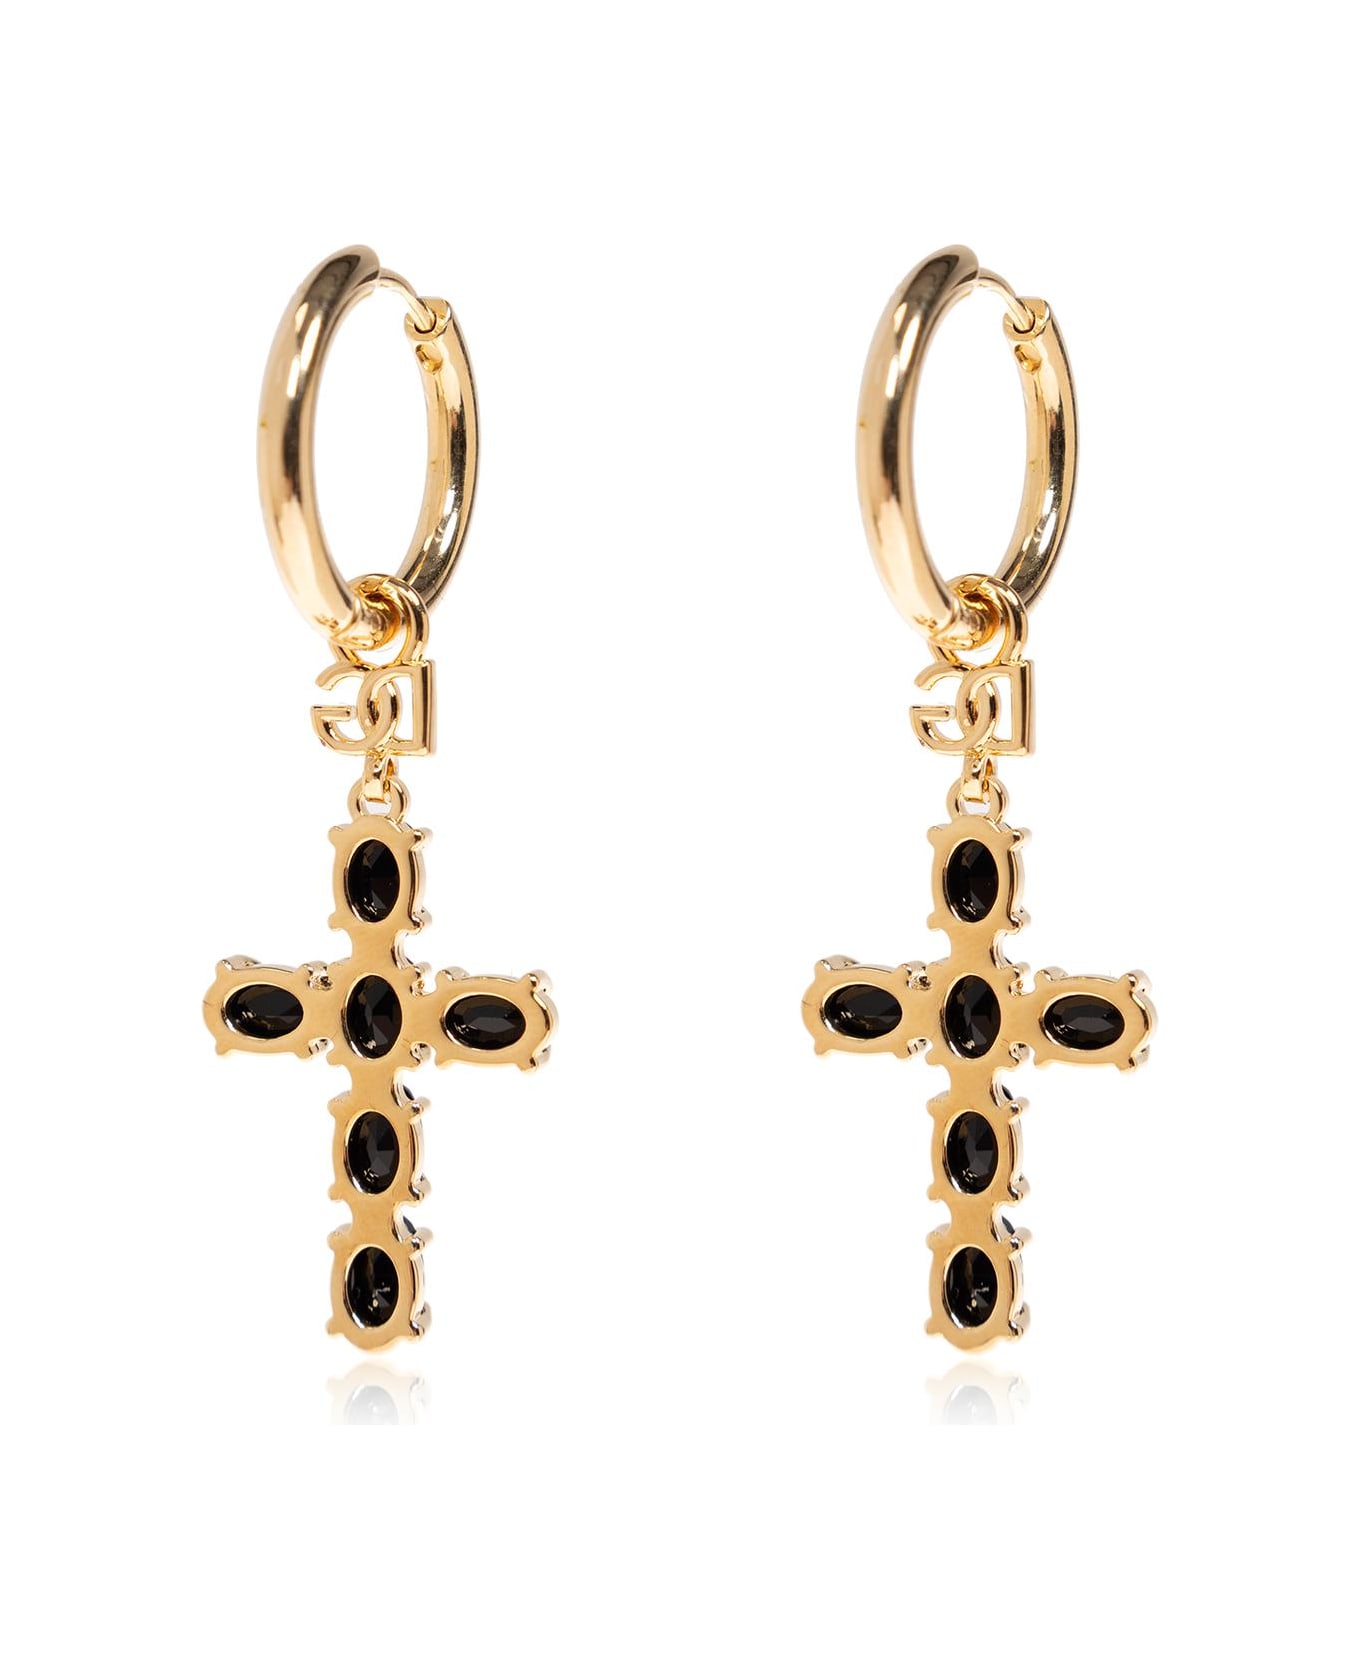 Dolce & Gabbana Earrings With Charms - Nero イヤリング